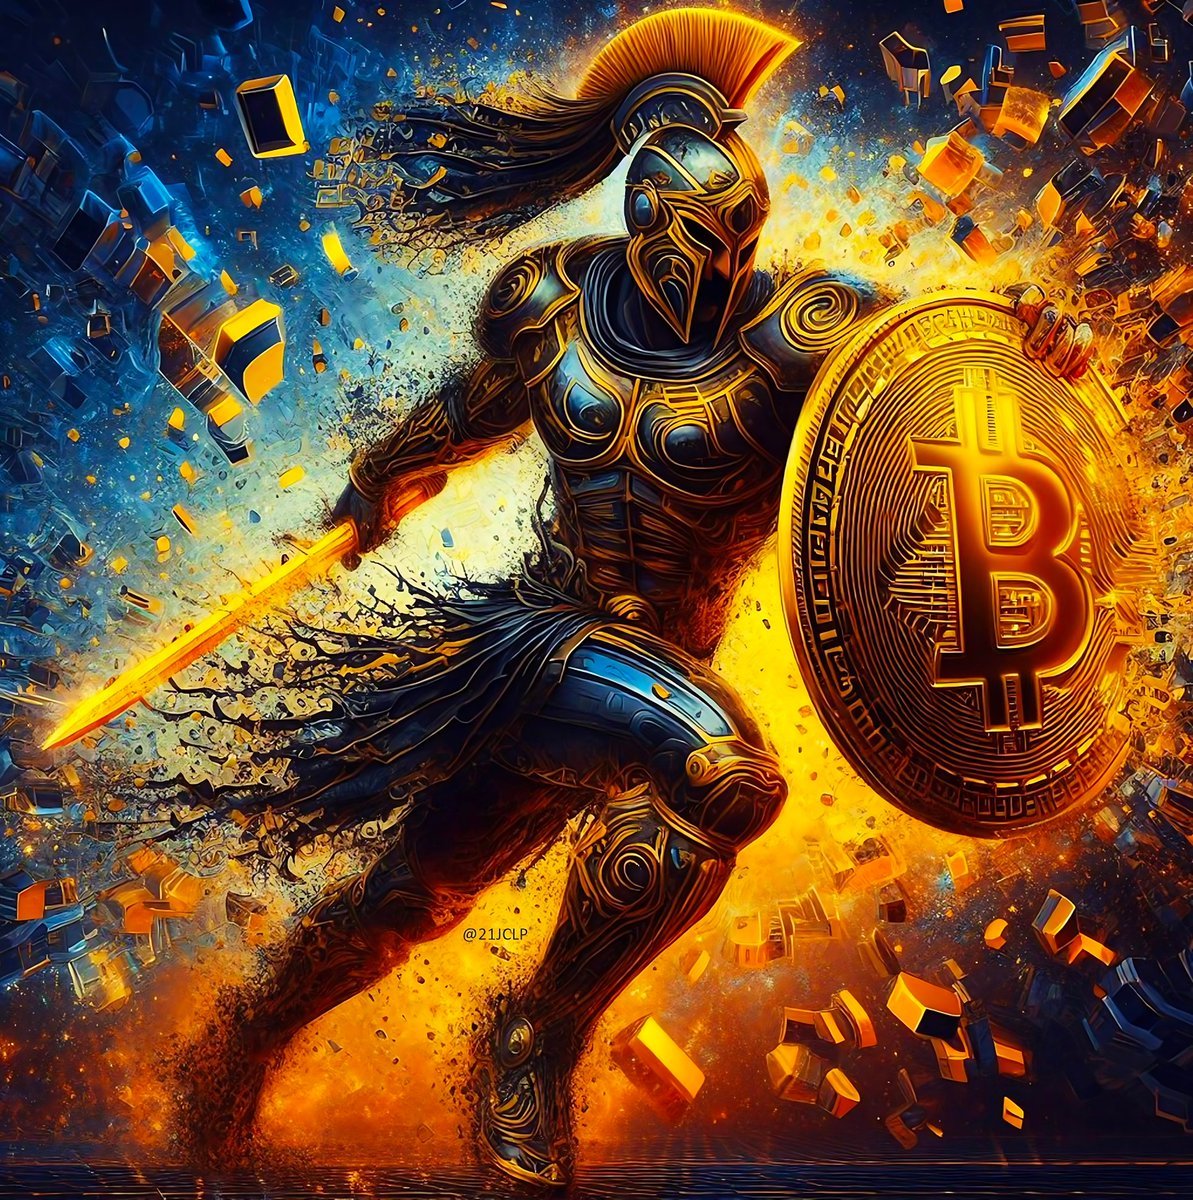 Bitcoin Price Prediction: BTC Looks Unstoppable And That Means This Bitcoin Derivative Is Poised To Explode